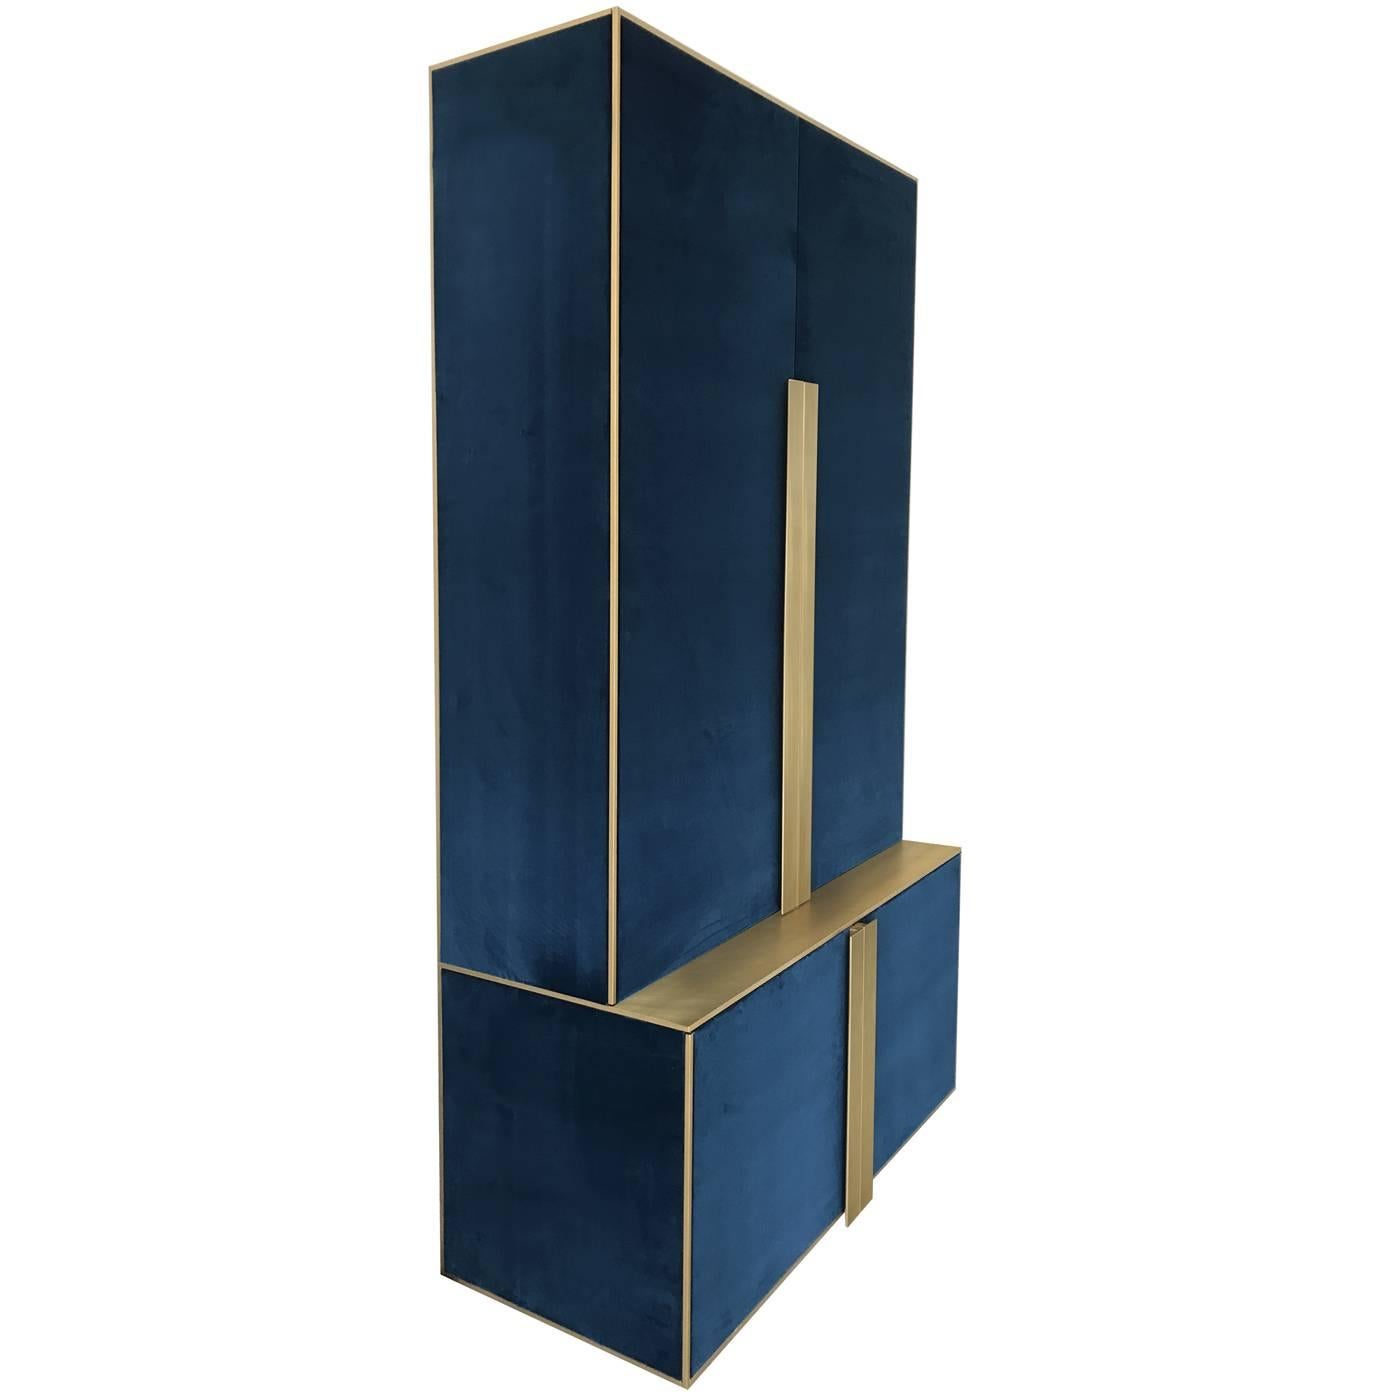 This superb cabinet will make a statement in any decor and was designed to contain bottles, glasses, plates, and table linens. Crafted by expert artisans, this piece features a structure in wood with edges in brushed brass with a golden finish that